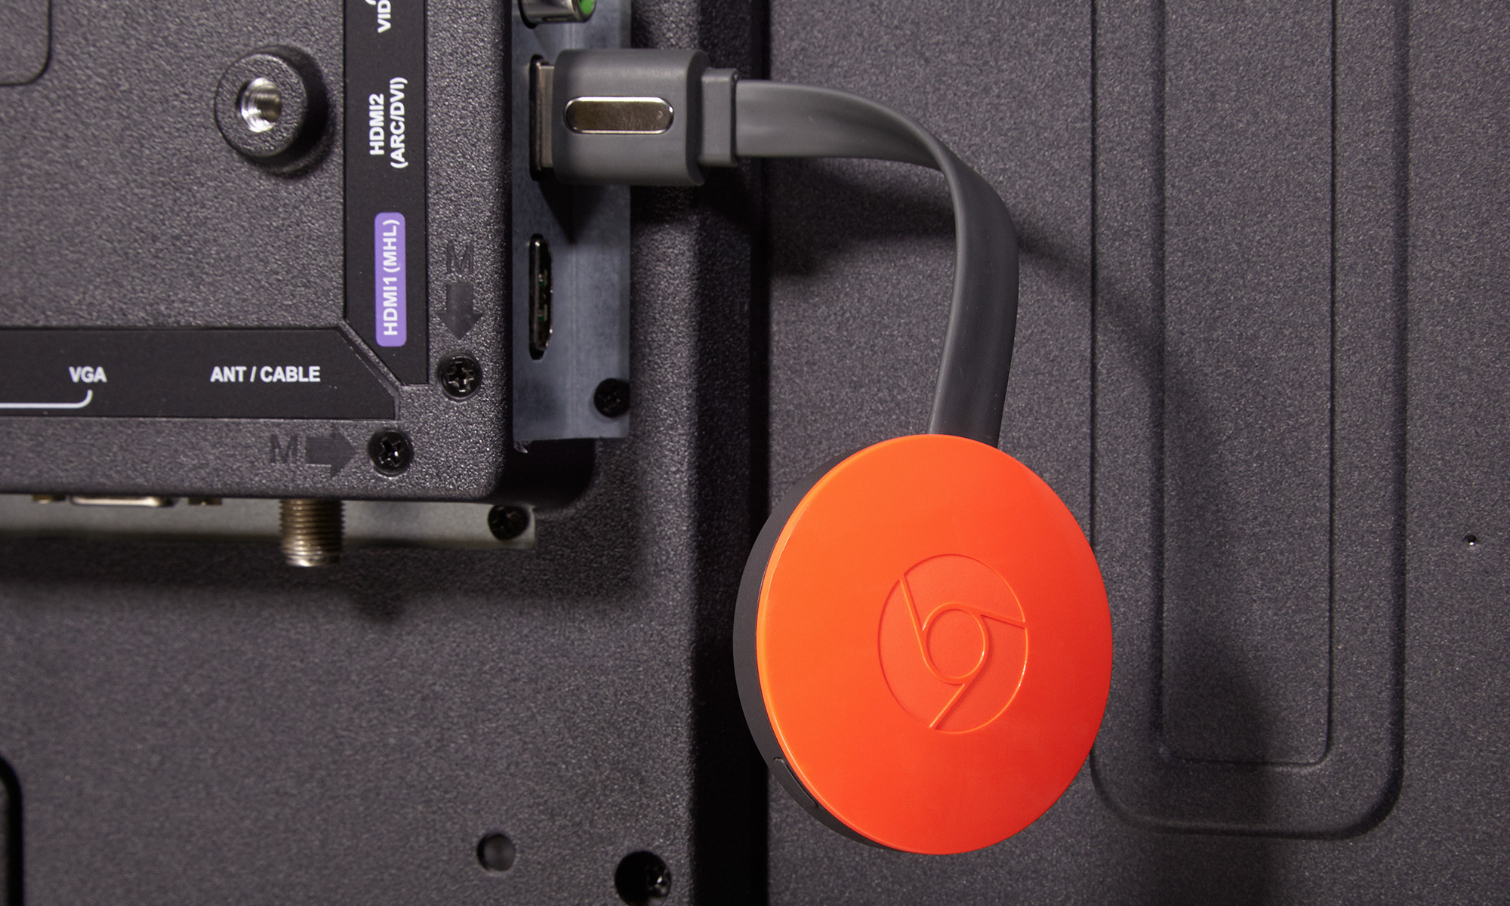 montón También Mar How to Change Your Wi-Fi Network on Chromecast - Tom's Guide | Tom's Guide